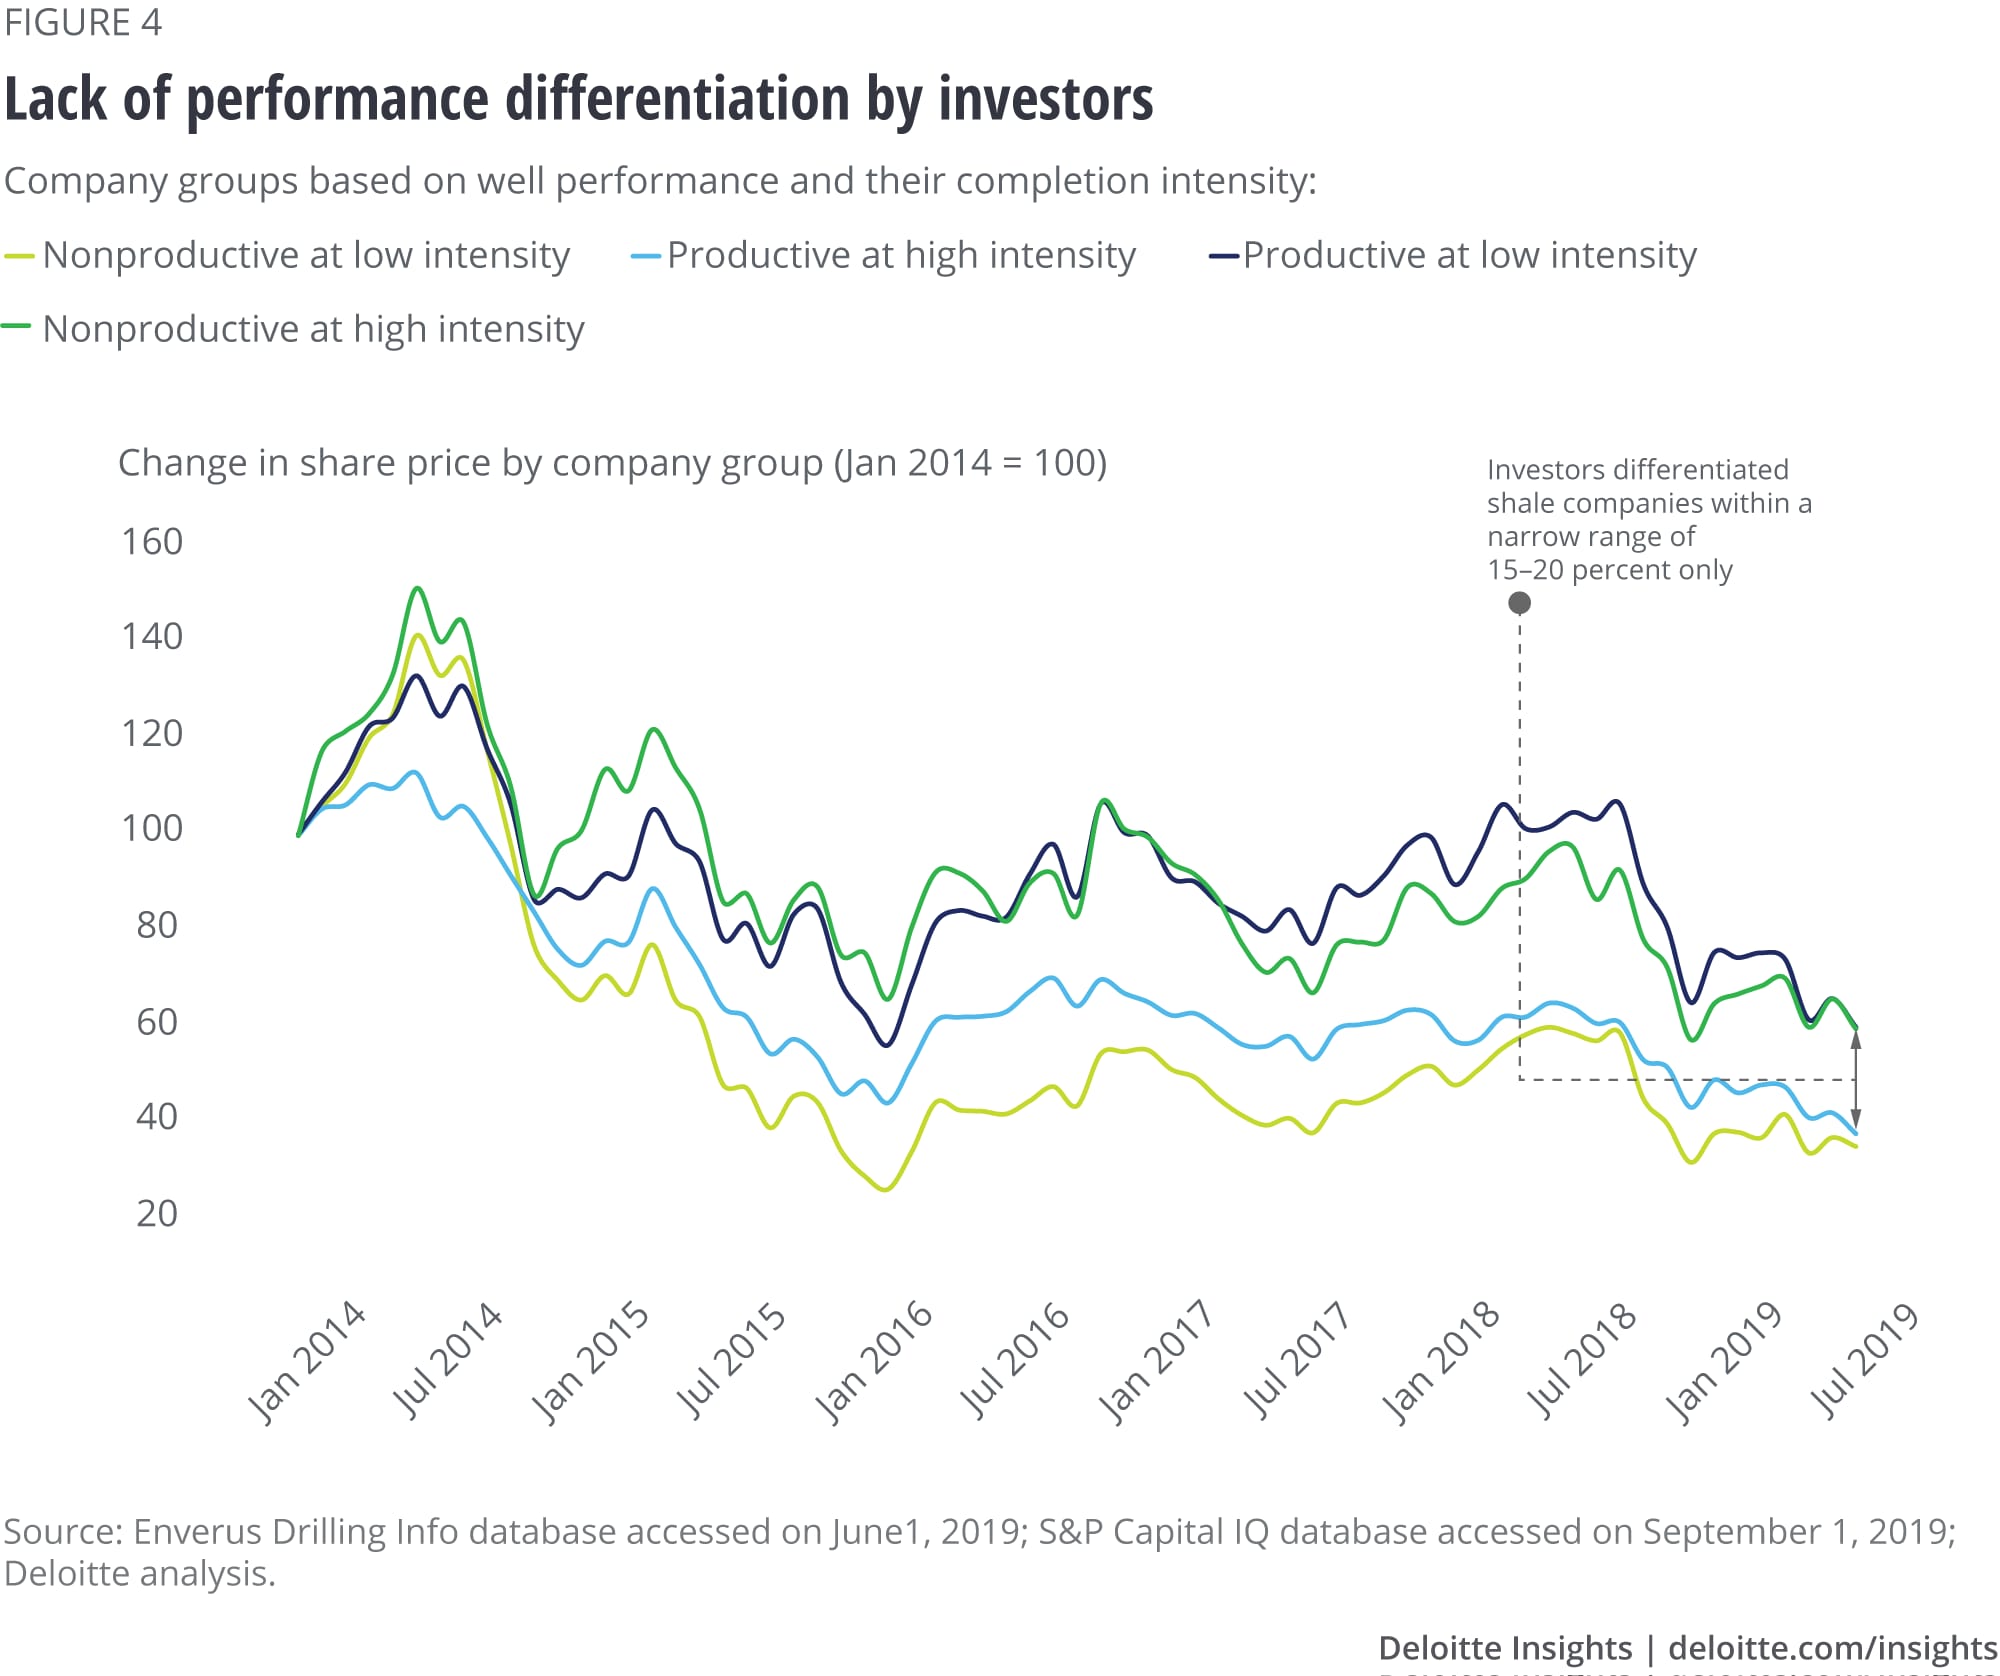 Lack of performance differentiation by investors